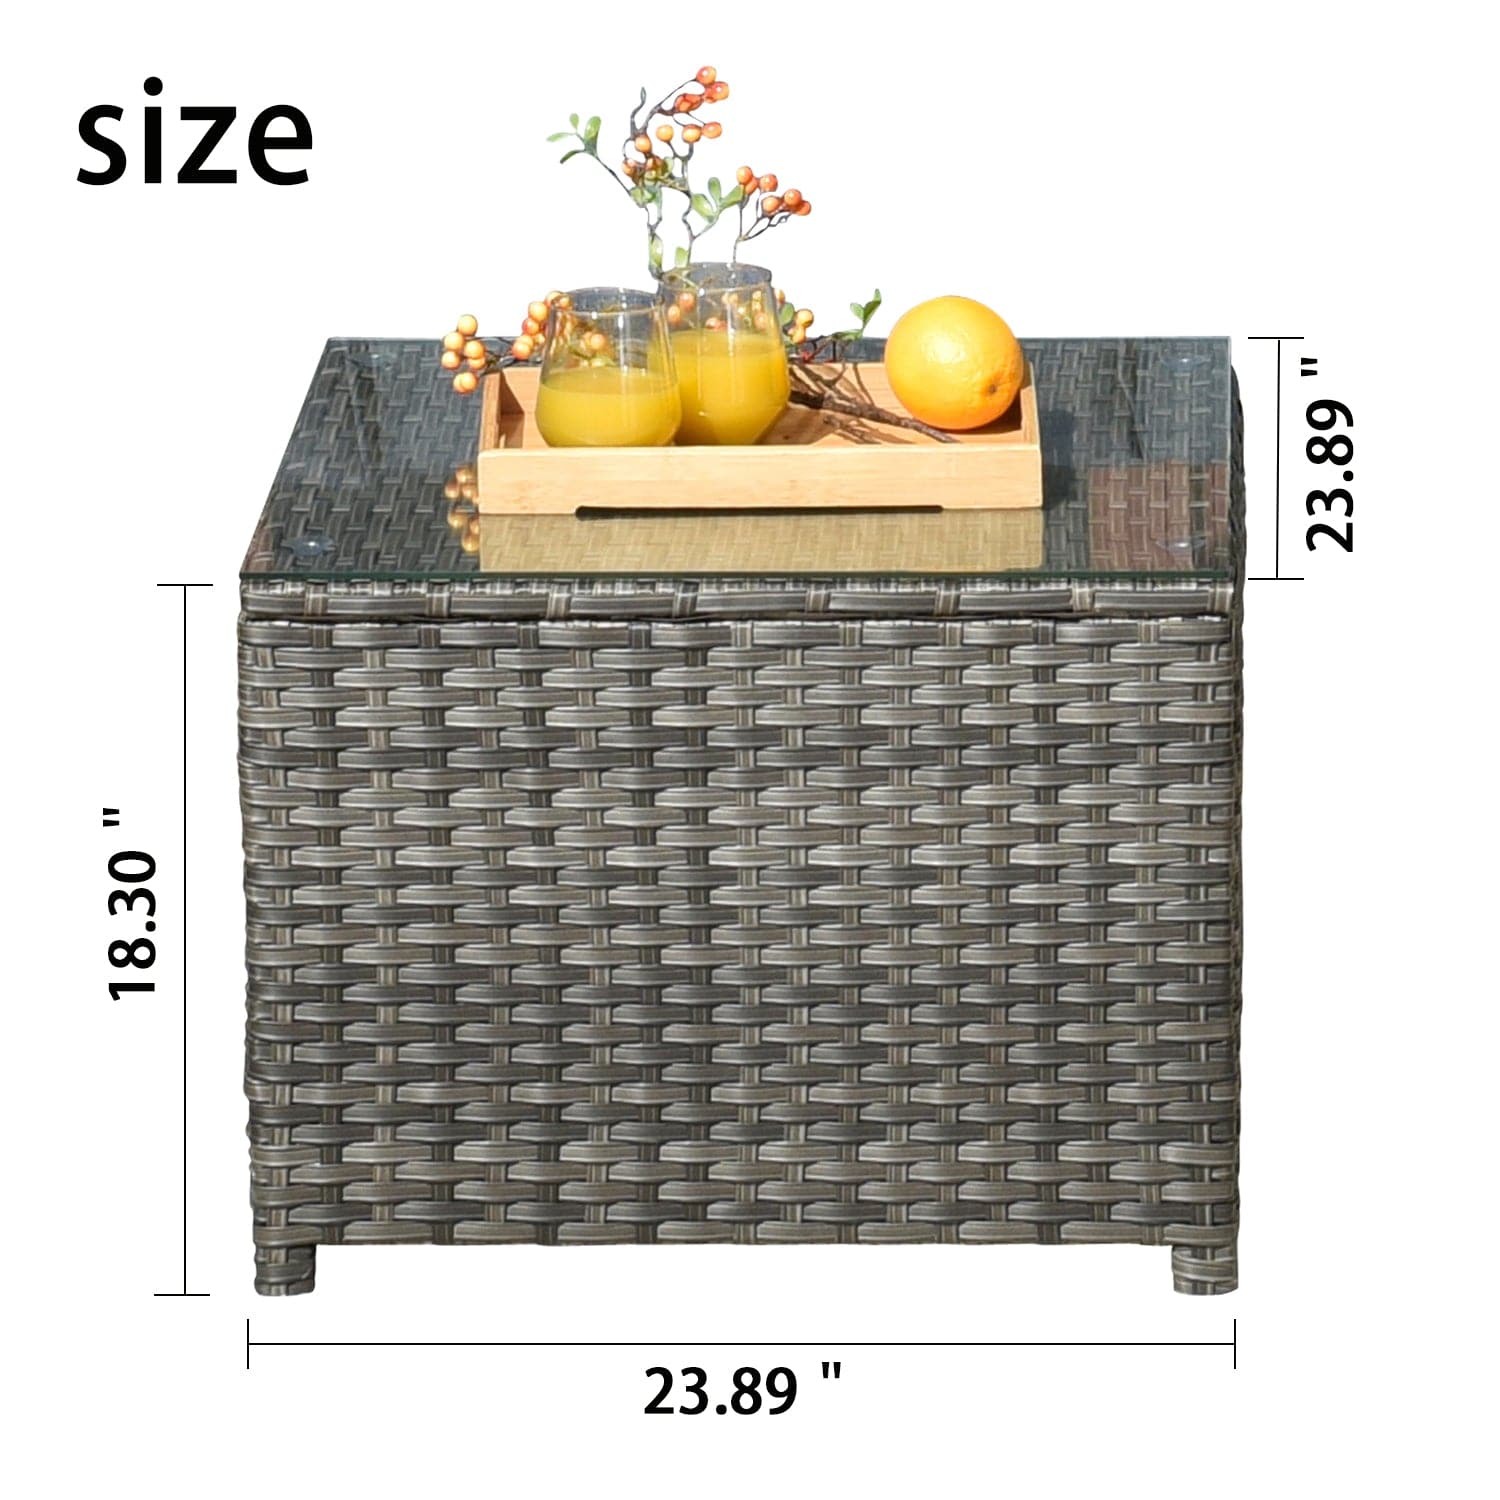 Ovios Balcony Grey Wicker Table New Vultros and Kenard with Glass Top